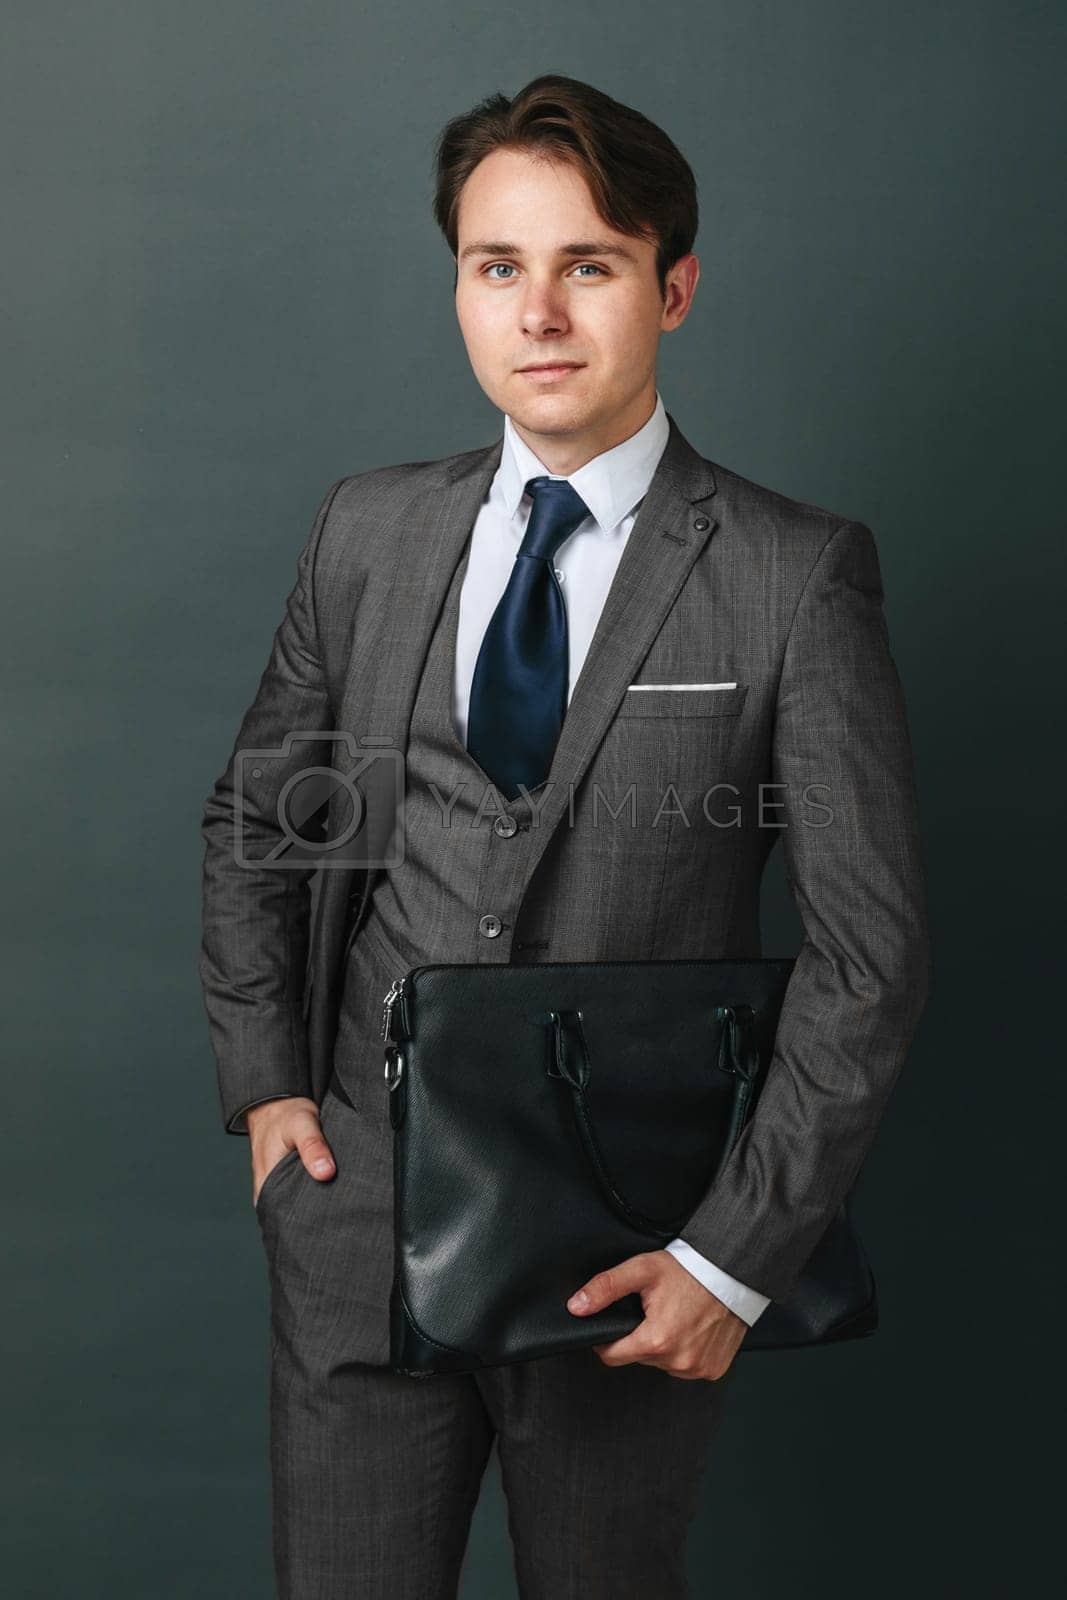 Royalty free image of Portrait of a businessman who is holding a briefcase. Light background by Sd28DimoN_1976